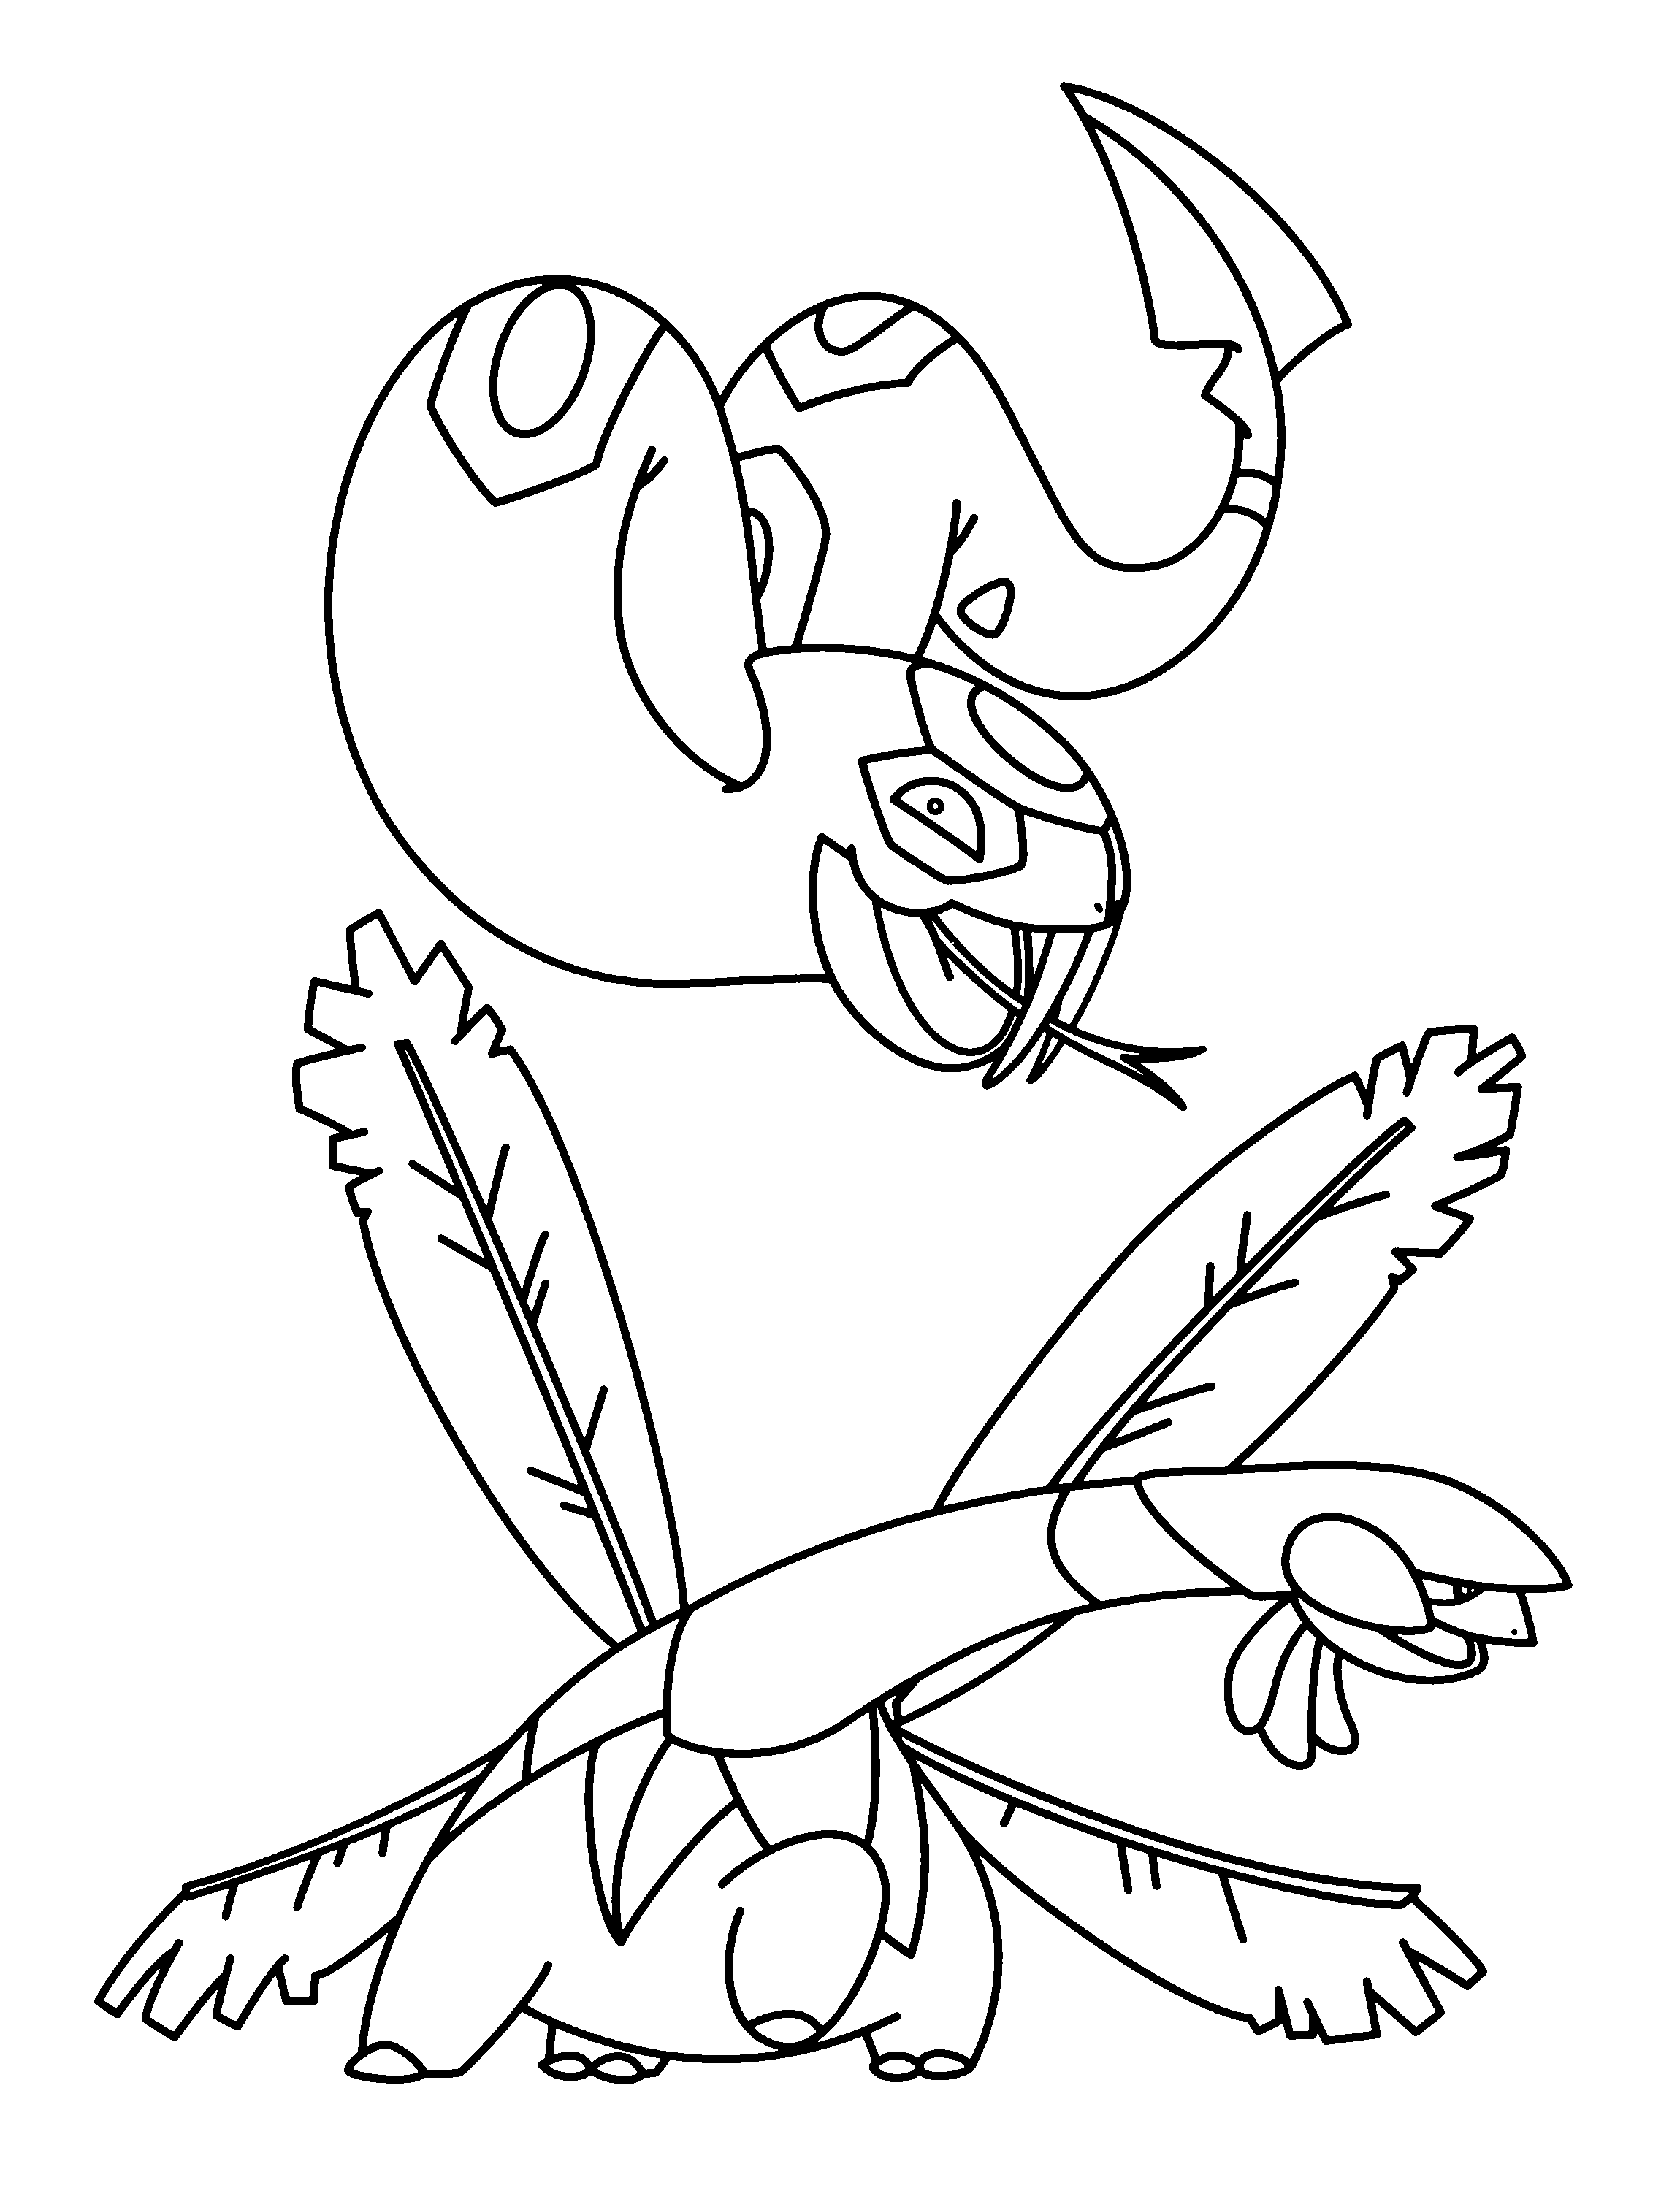 animated-coloring-pages-pokemon-image-0896